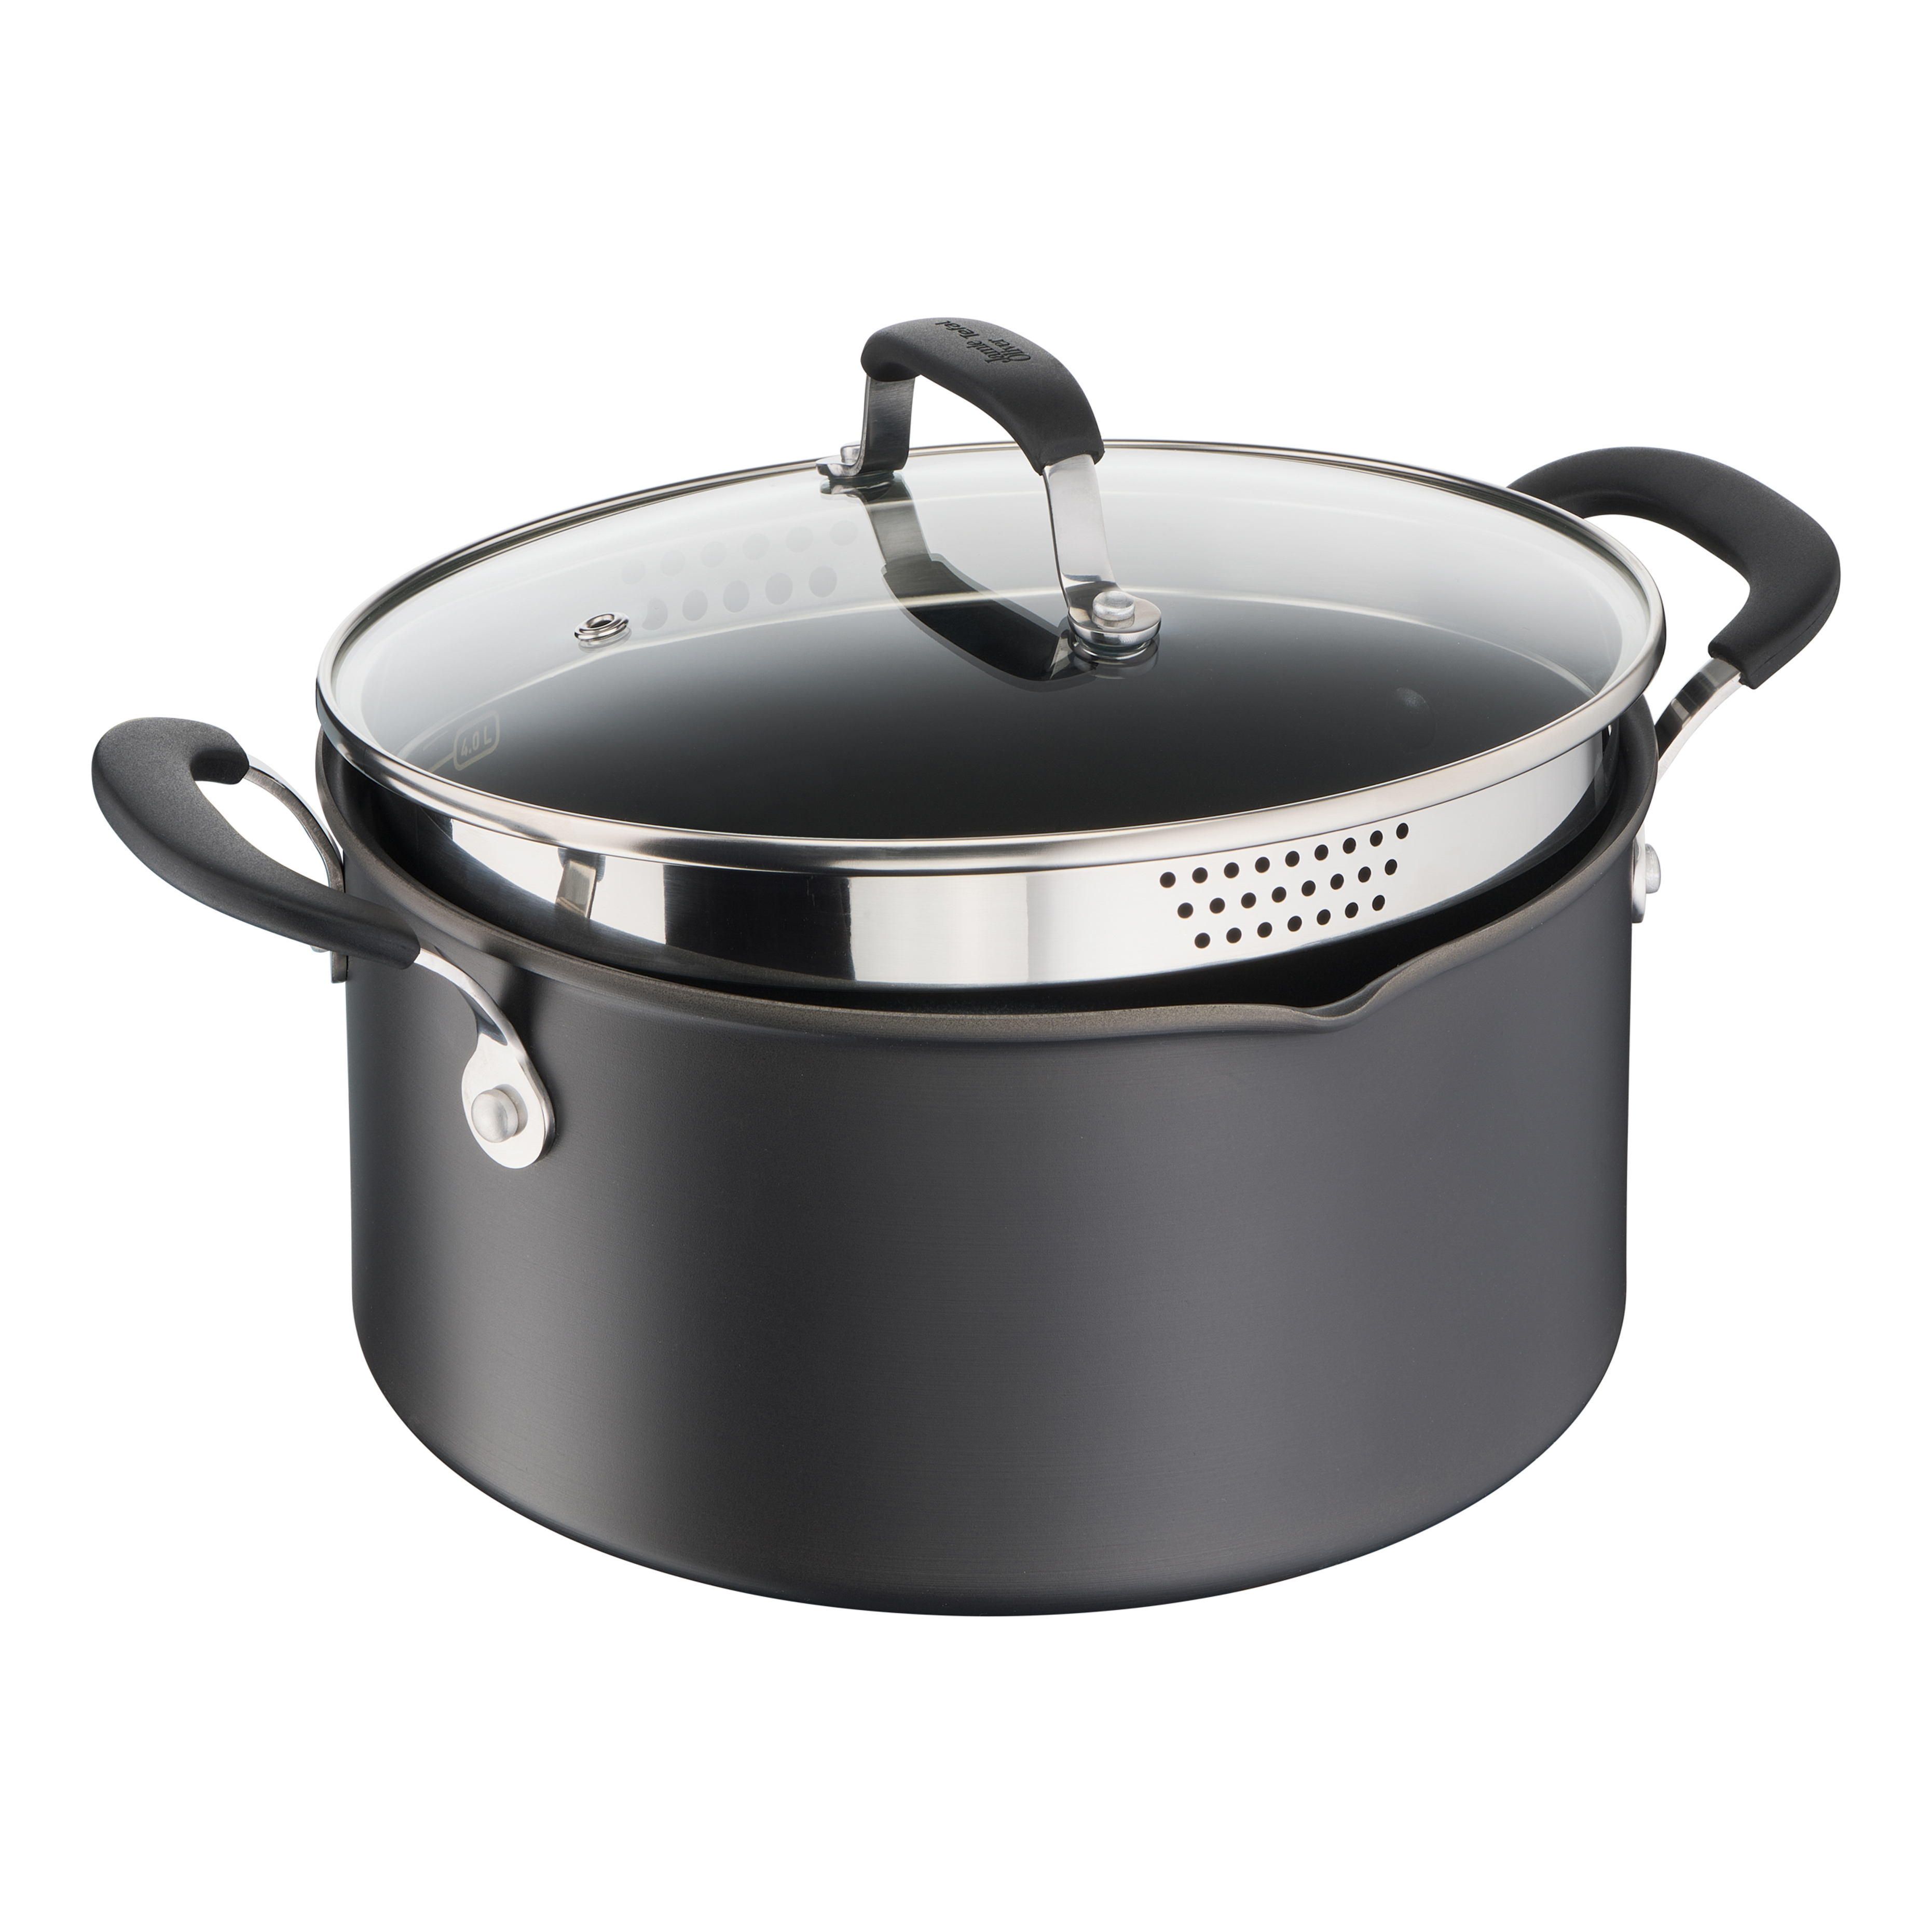 Casserole with lid Tefal Jamie Oliver 3 л H8044444 H804444 H80444 H8044 H  8044444 804444 80444 8044 804 Utensils Pots Pan for kitchen Tableware  Cooking pot stainless steel cookware - AliExpress